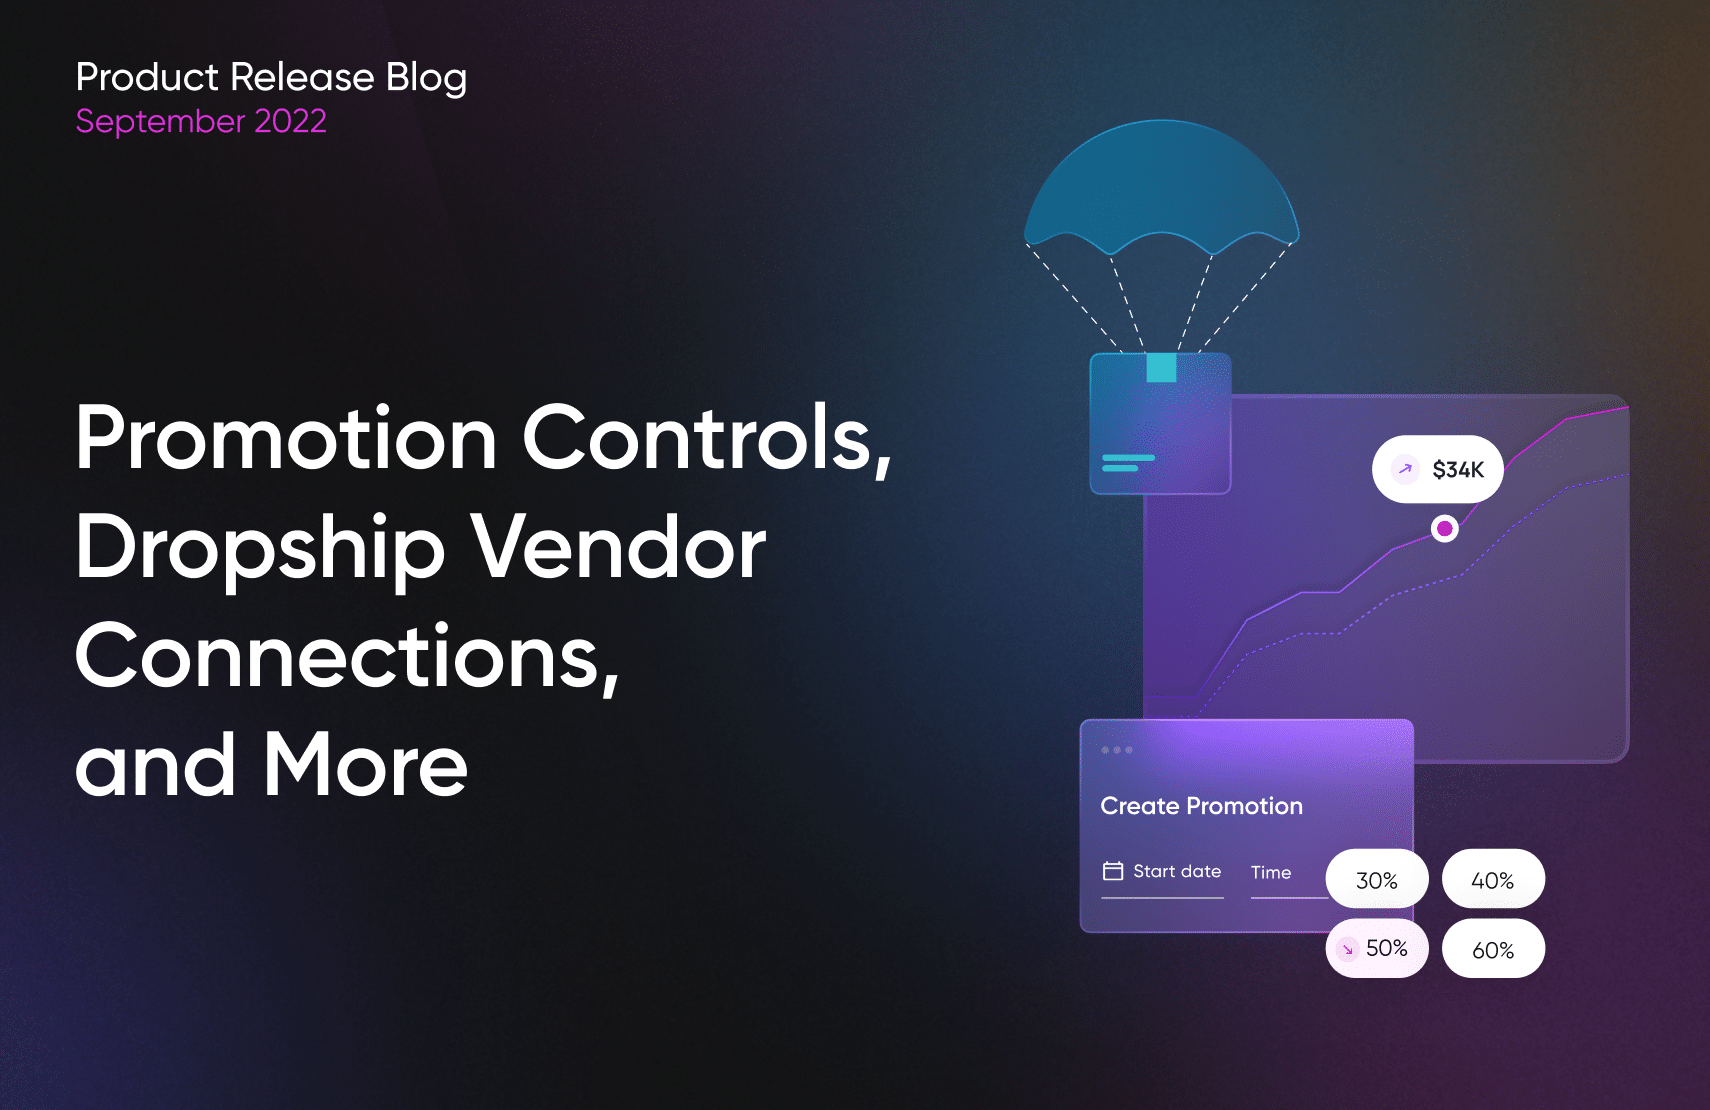 Check out our latest product release, featuring promotion controls, dropship vendor connections, and more.